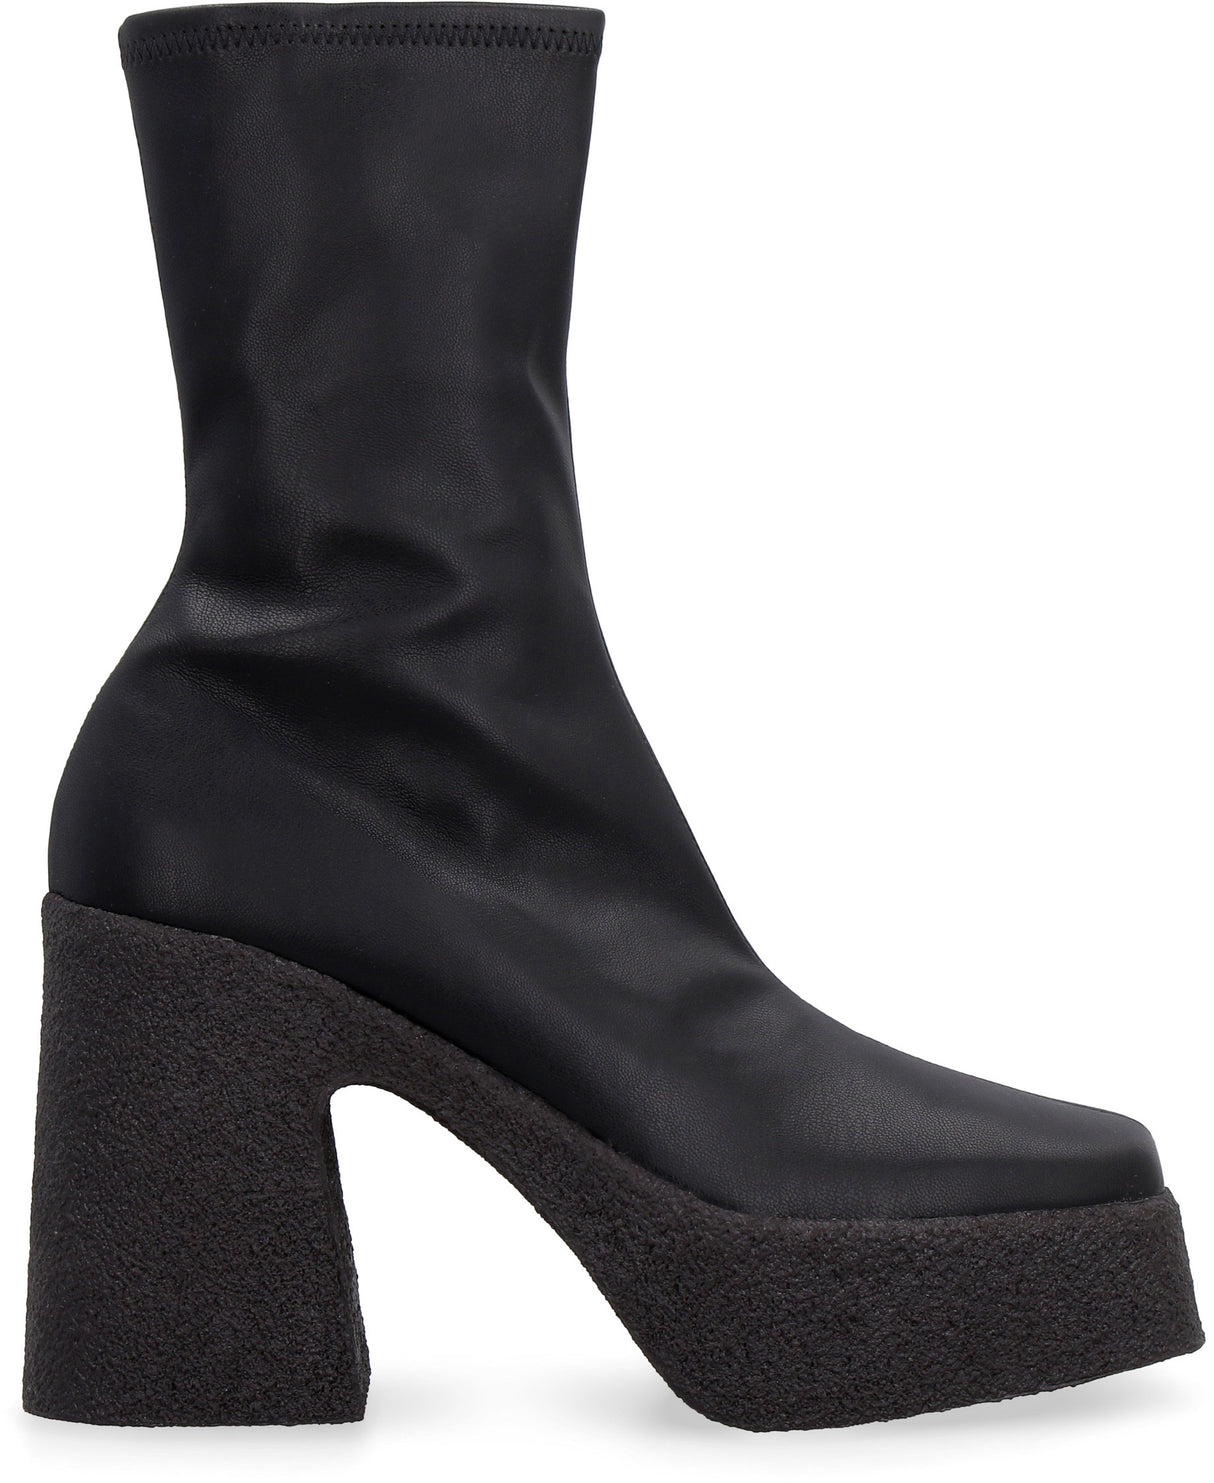 STELLA MCCARTNEY Black Smooth Stretch Ankle Boots with Thick Heel and Plateau for Women